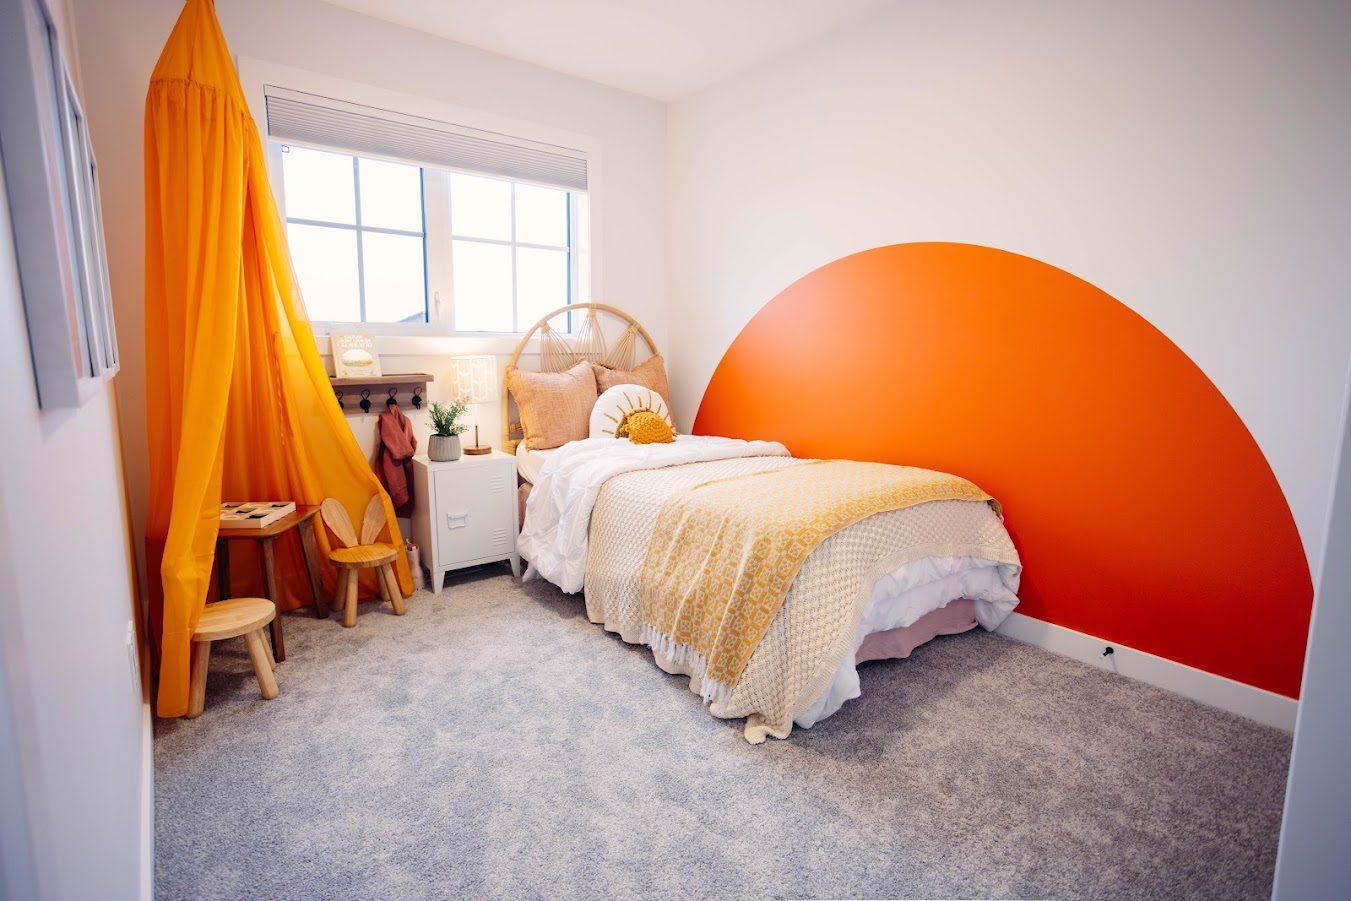 A bedroom with orange and white walls.